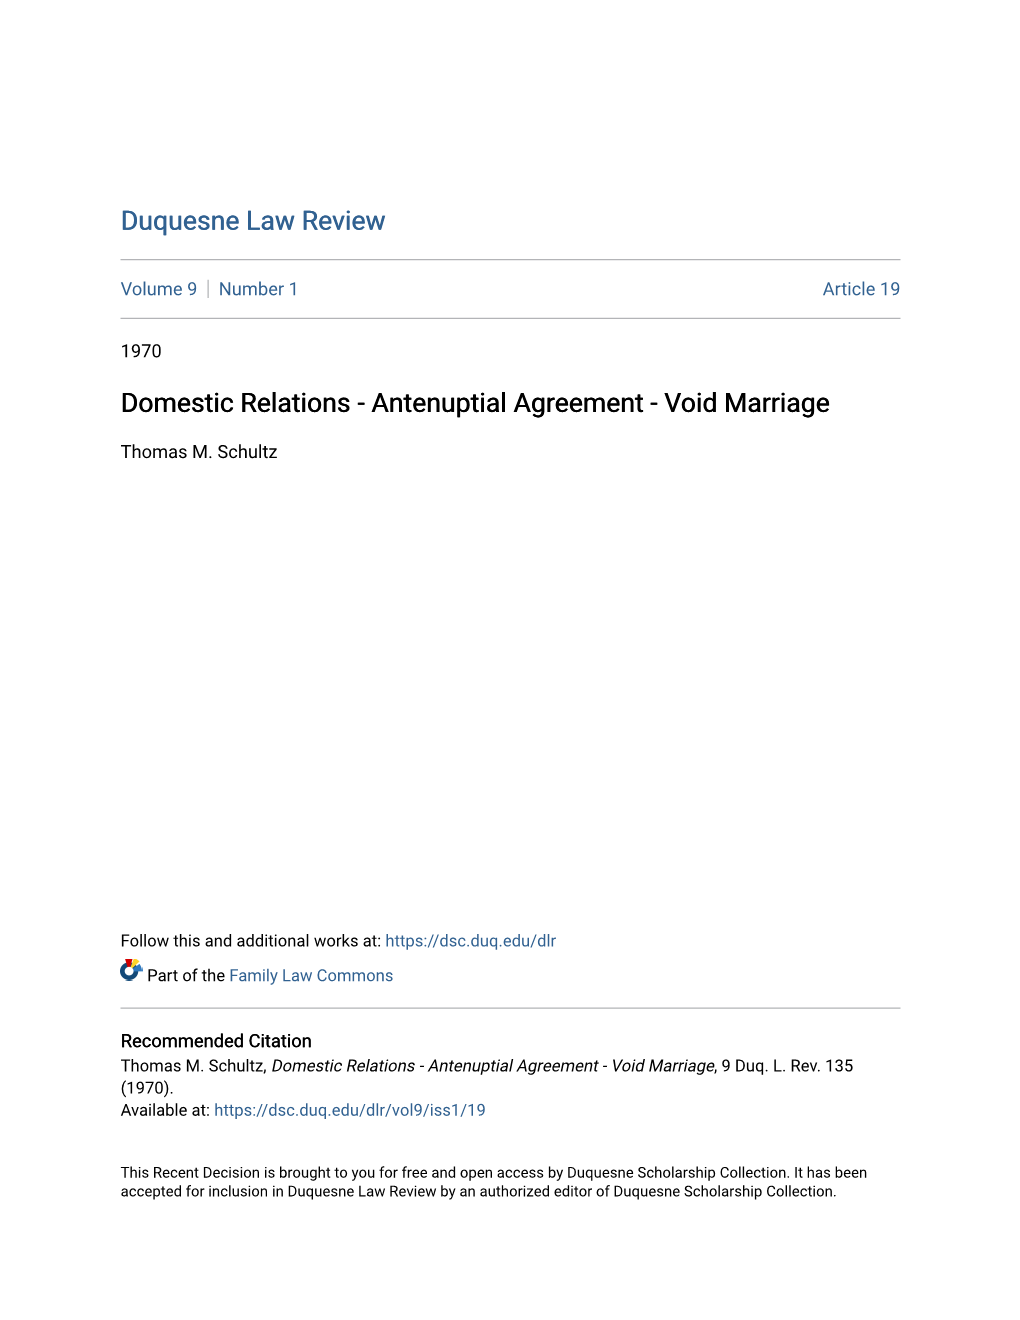 Domestic Relations - Antenuptial Agreement - Void Marriage